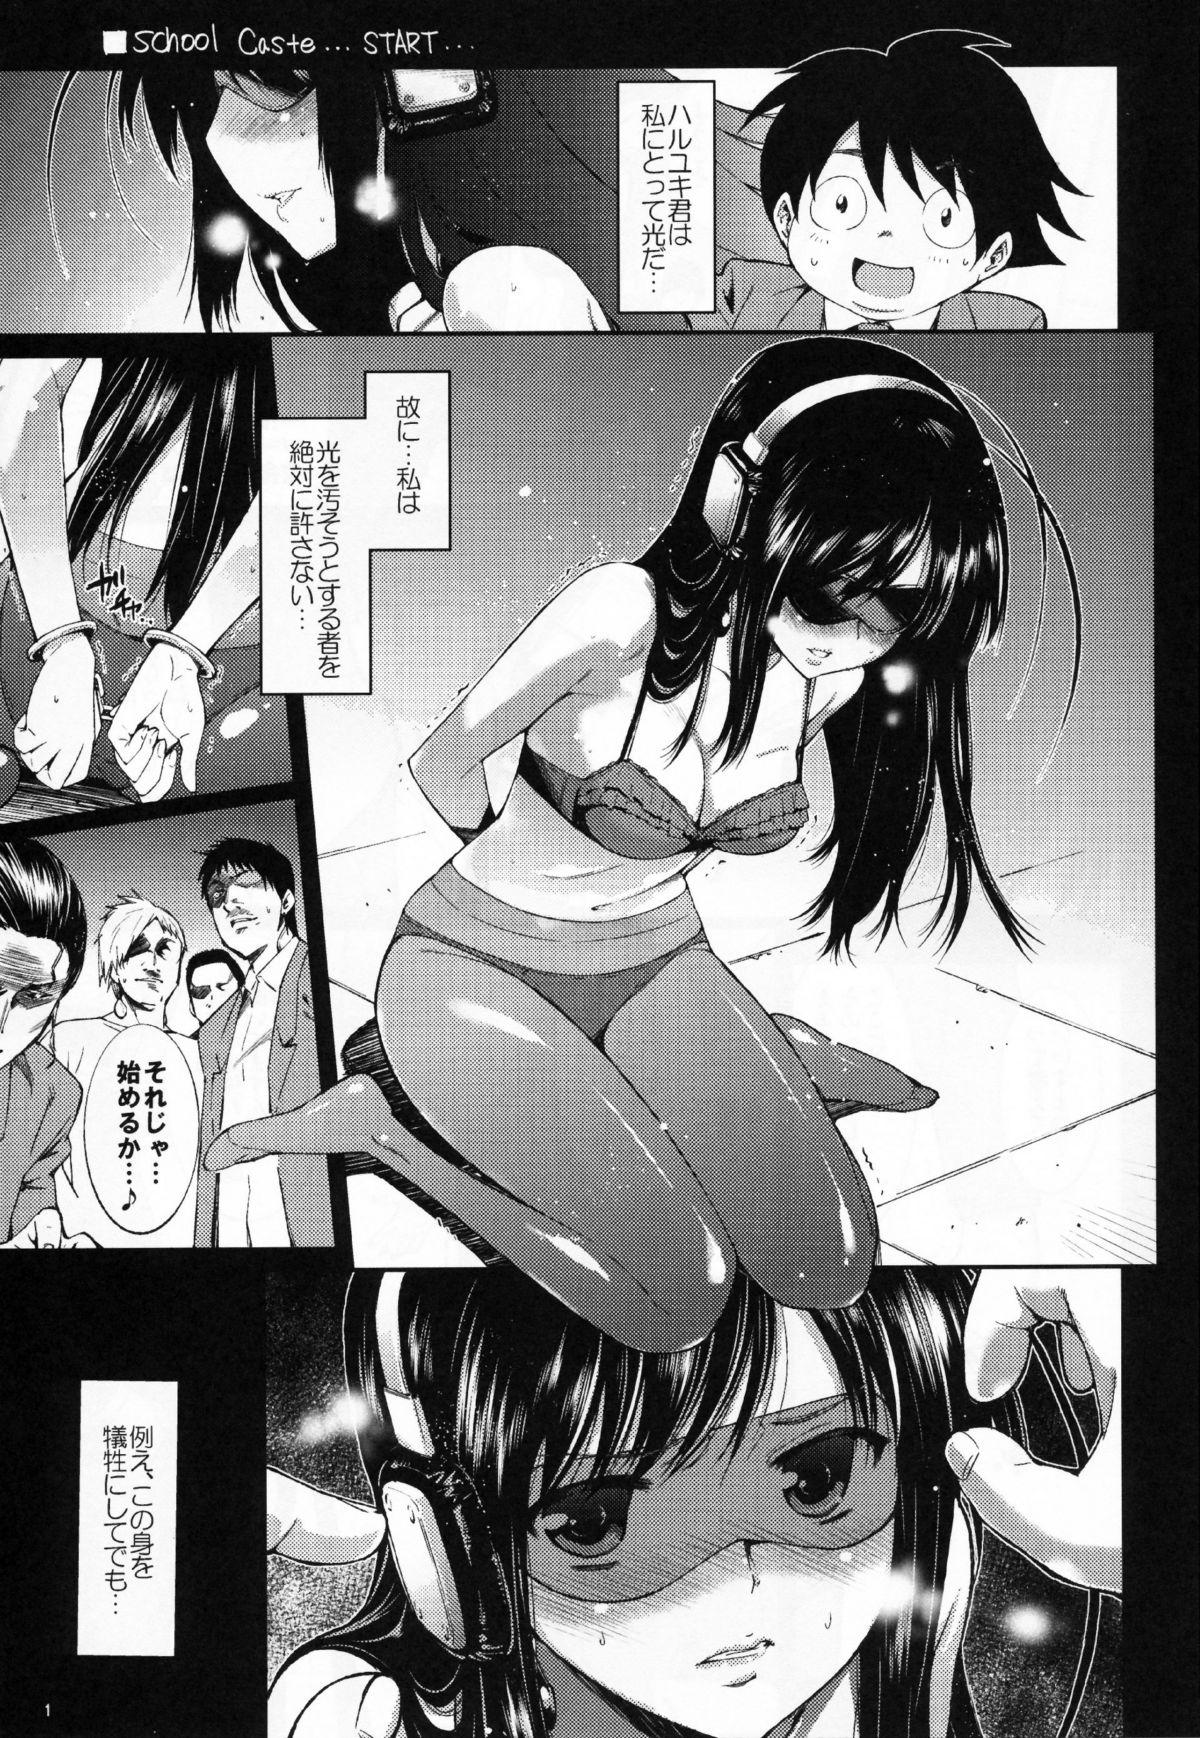 Amadora SCHOOL CASTE - Accel world And - Page 3